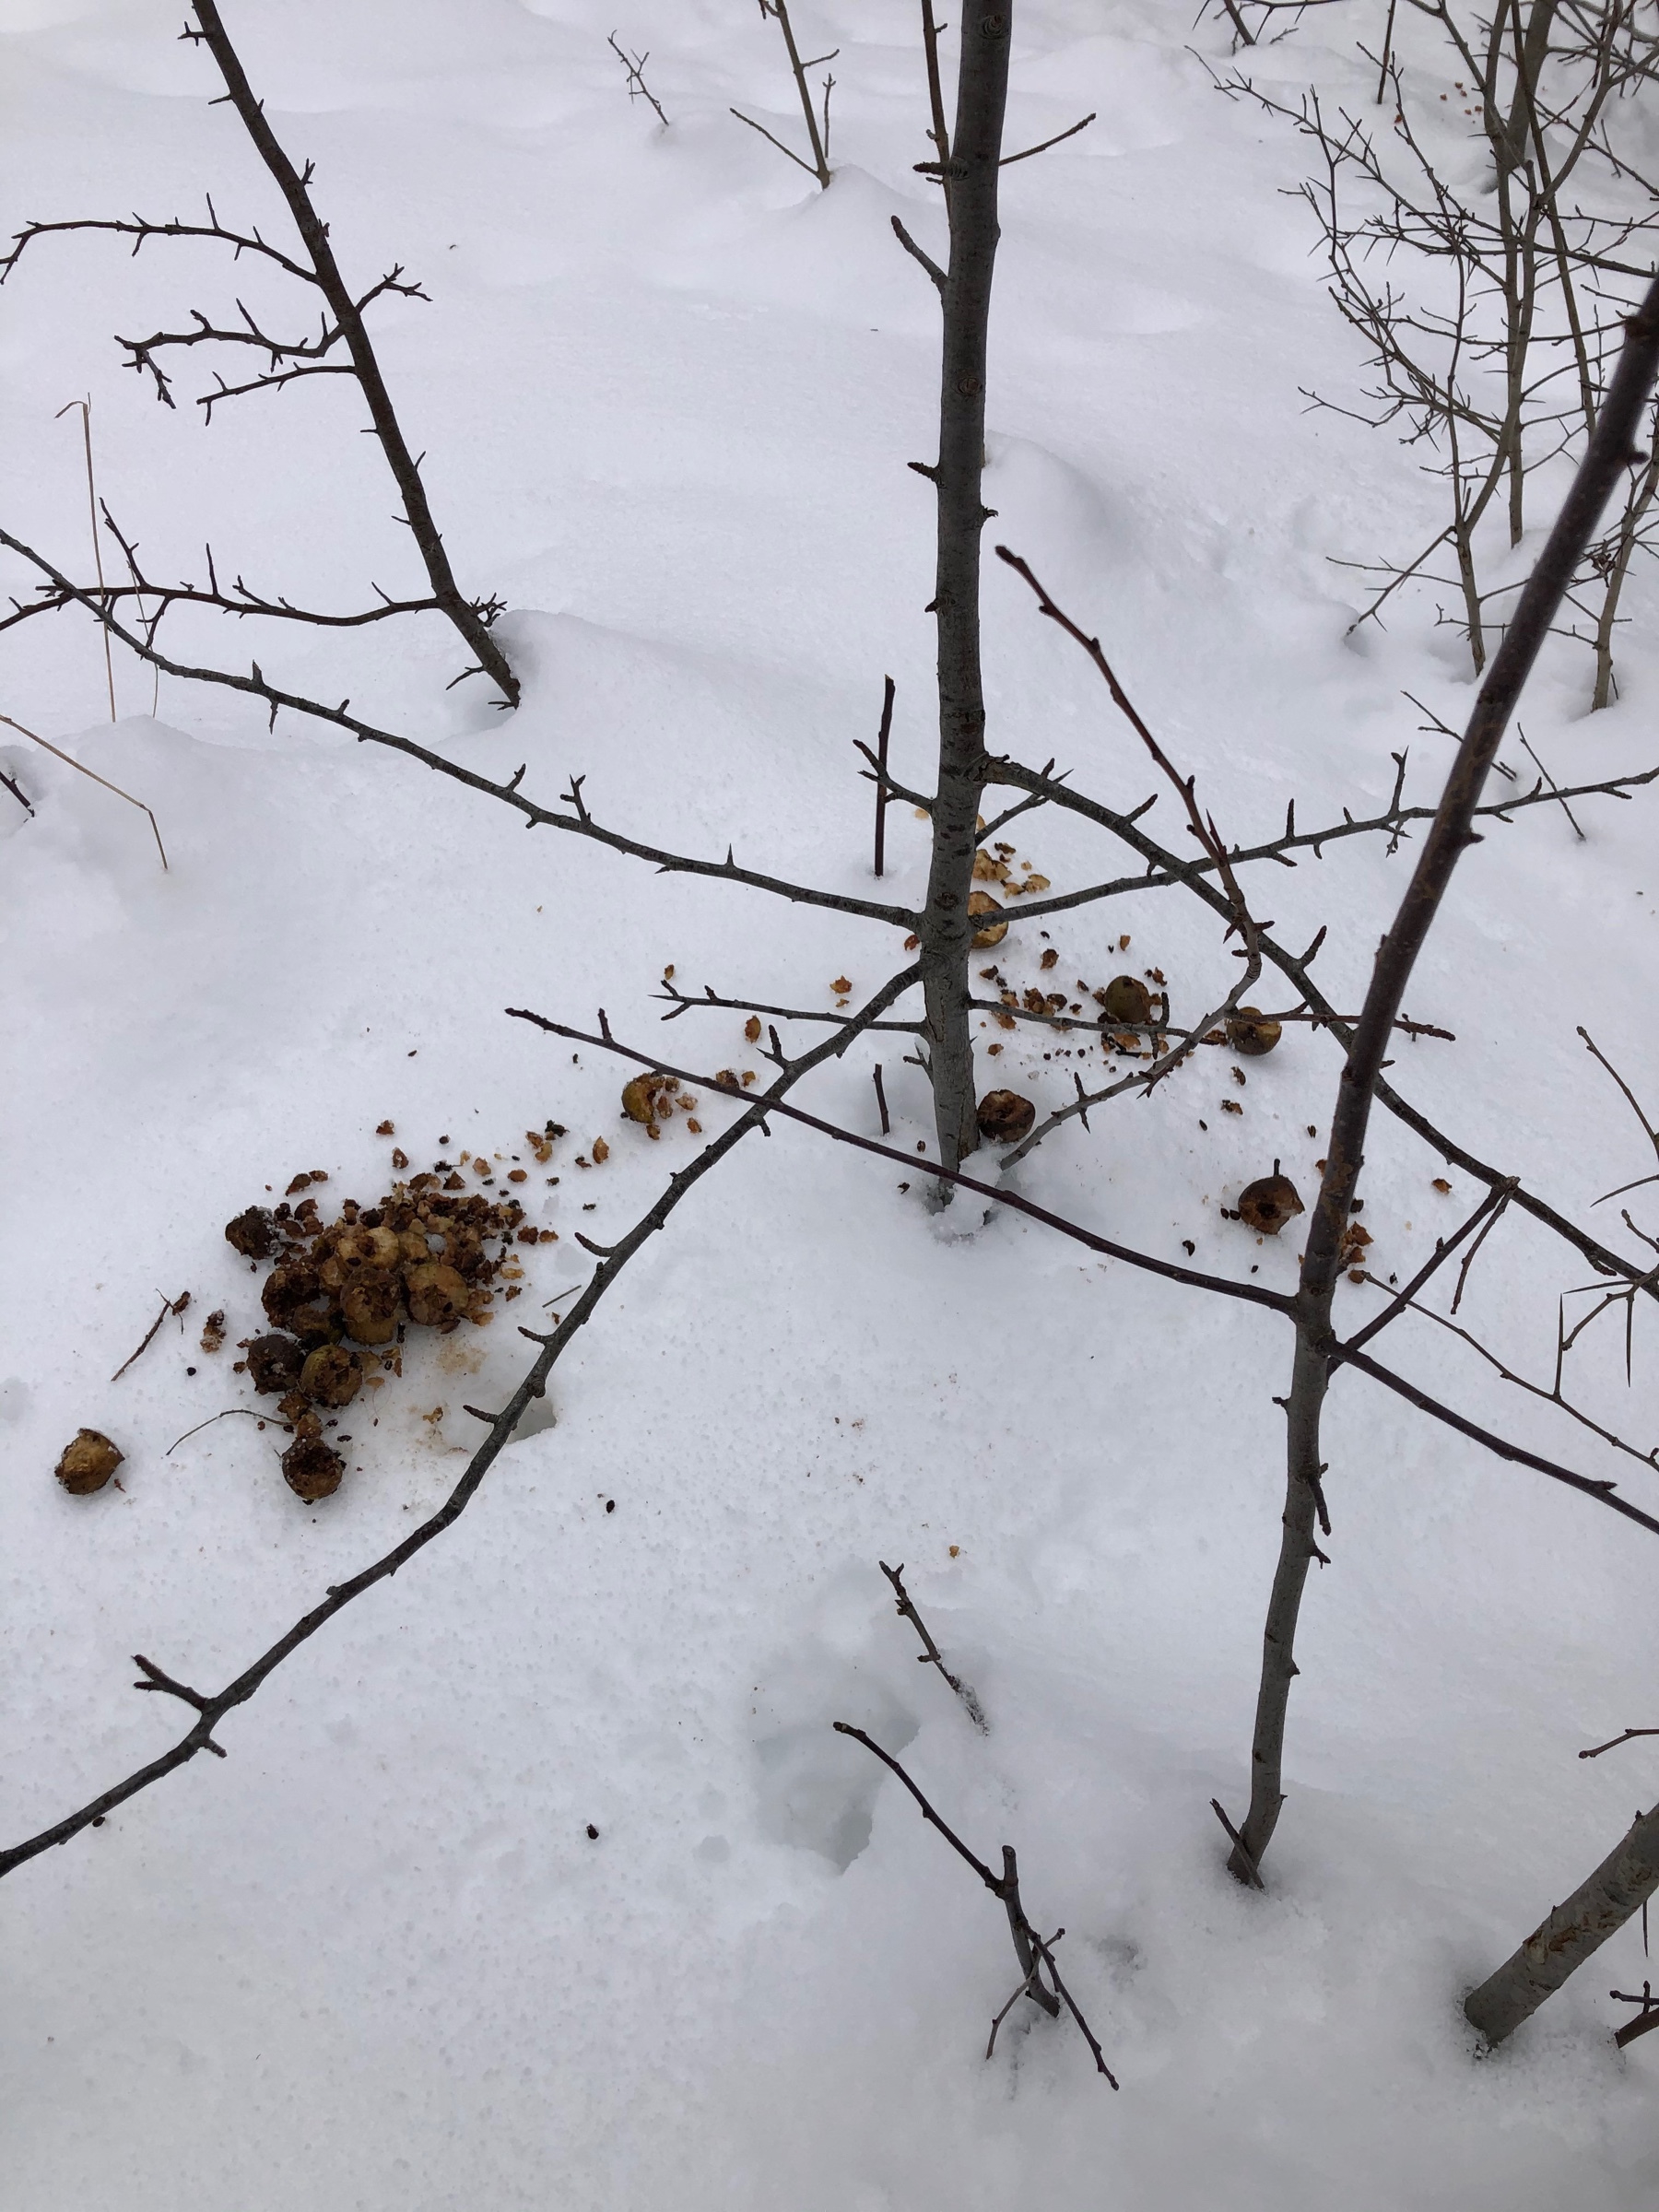 old, brown apples sitting on snow beside a small bush